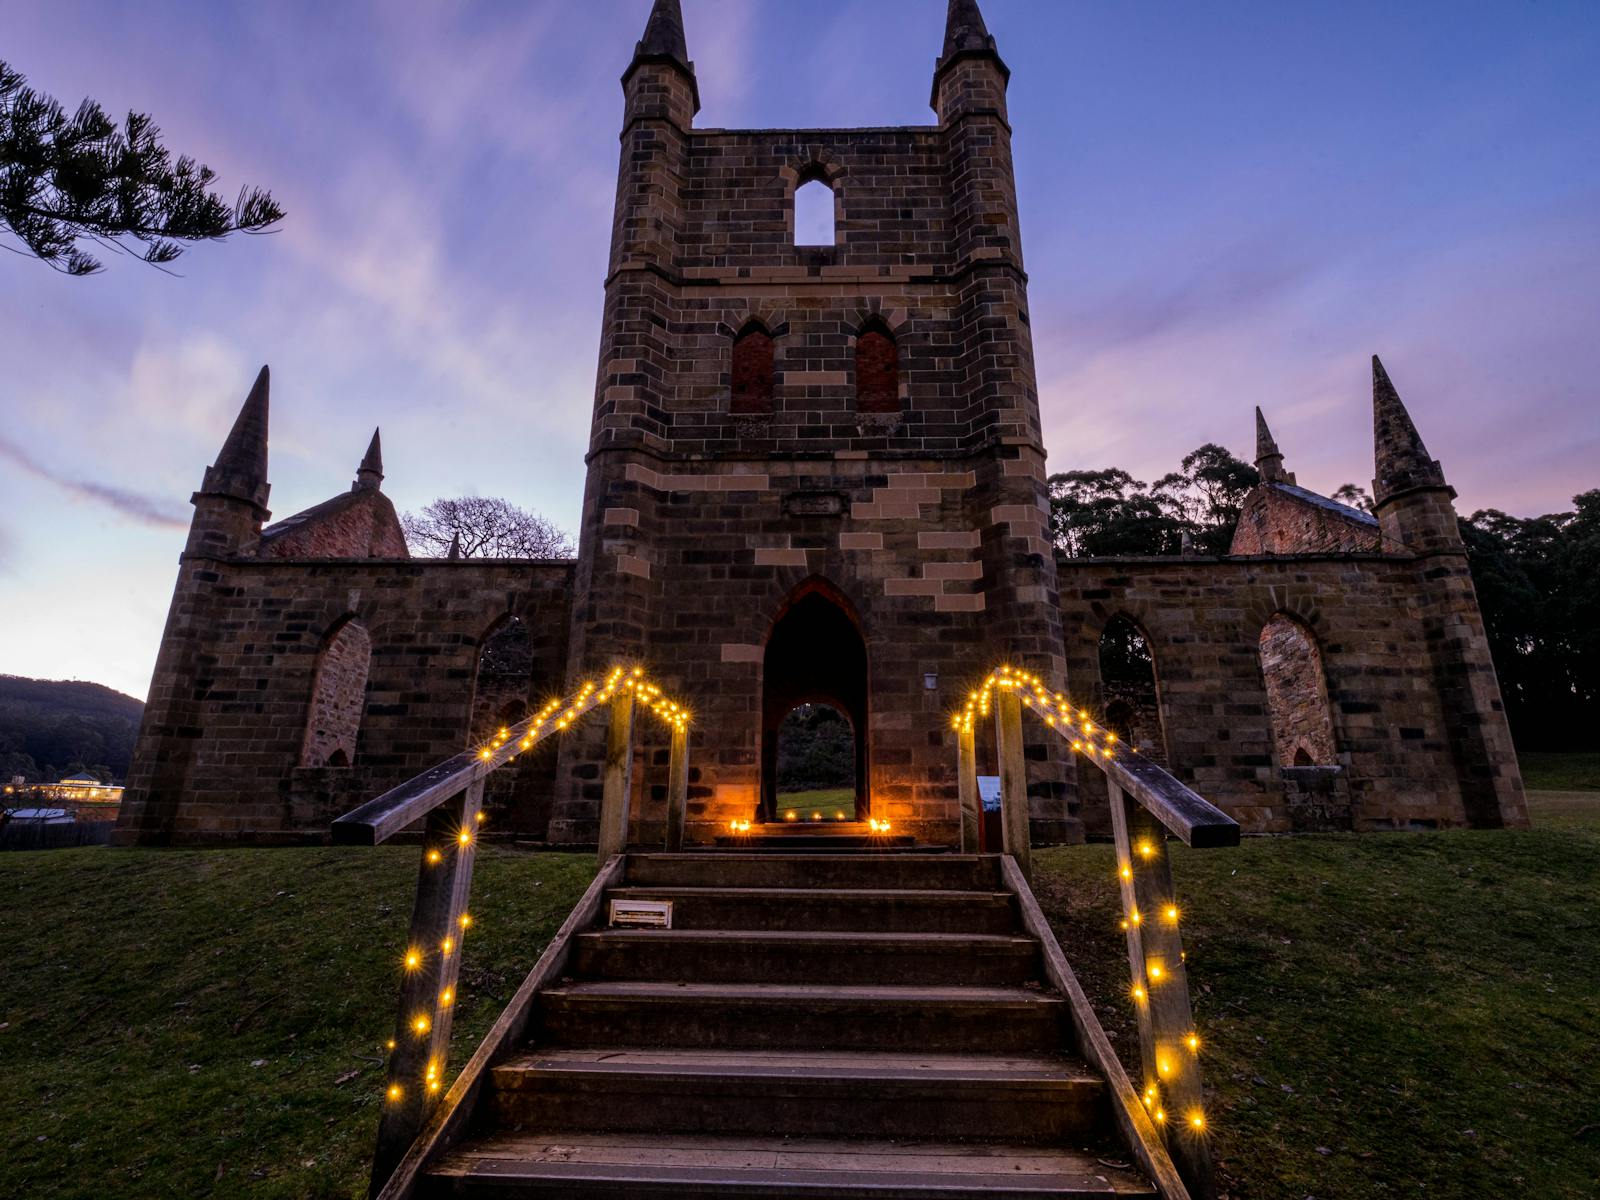 A closer look of Convict Church that is lit by lights under the purple and dark blue sky at dusk